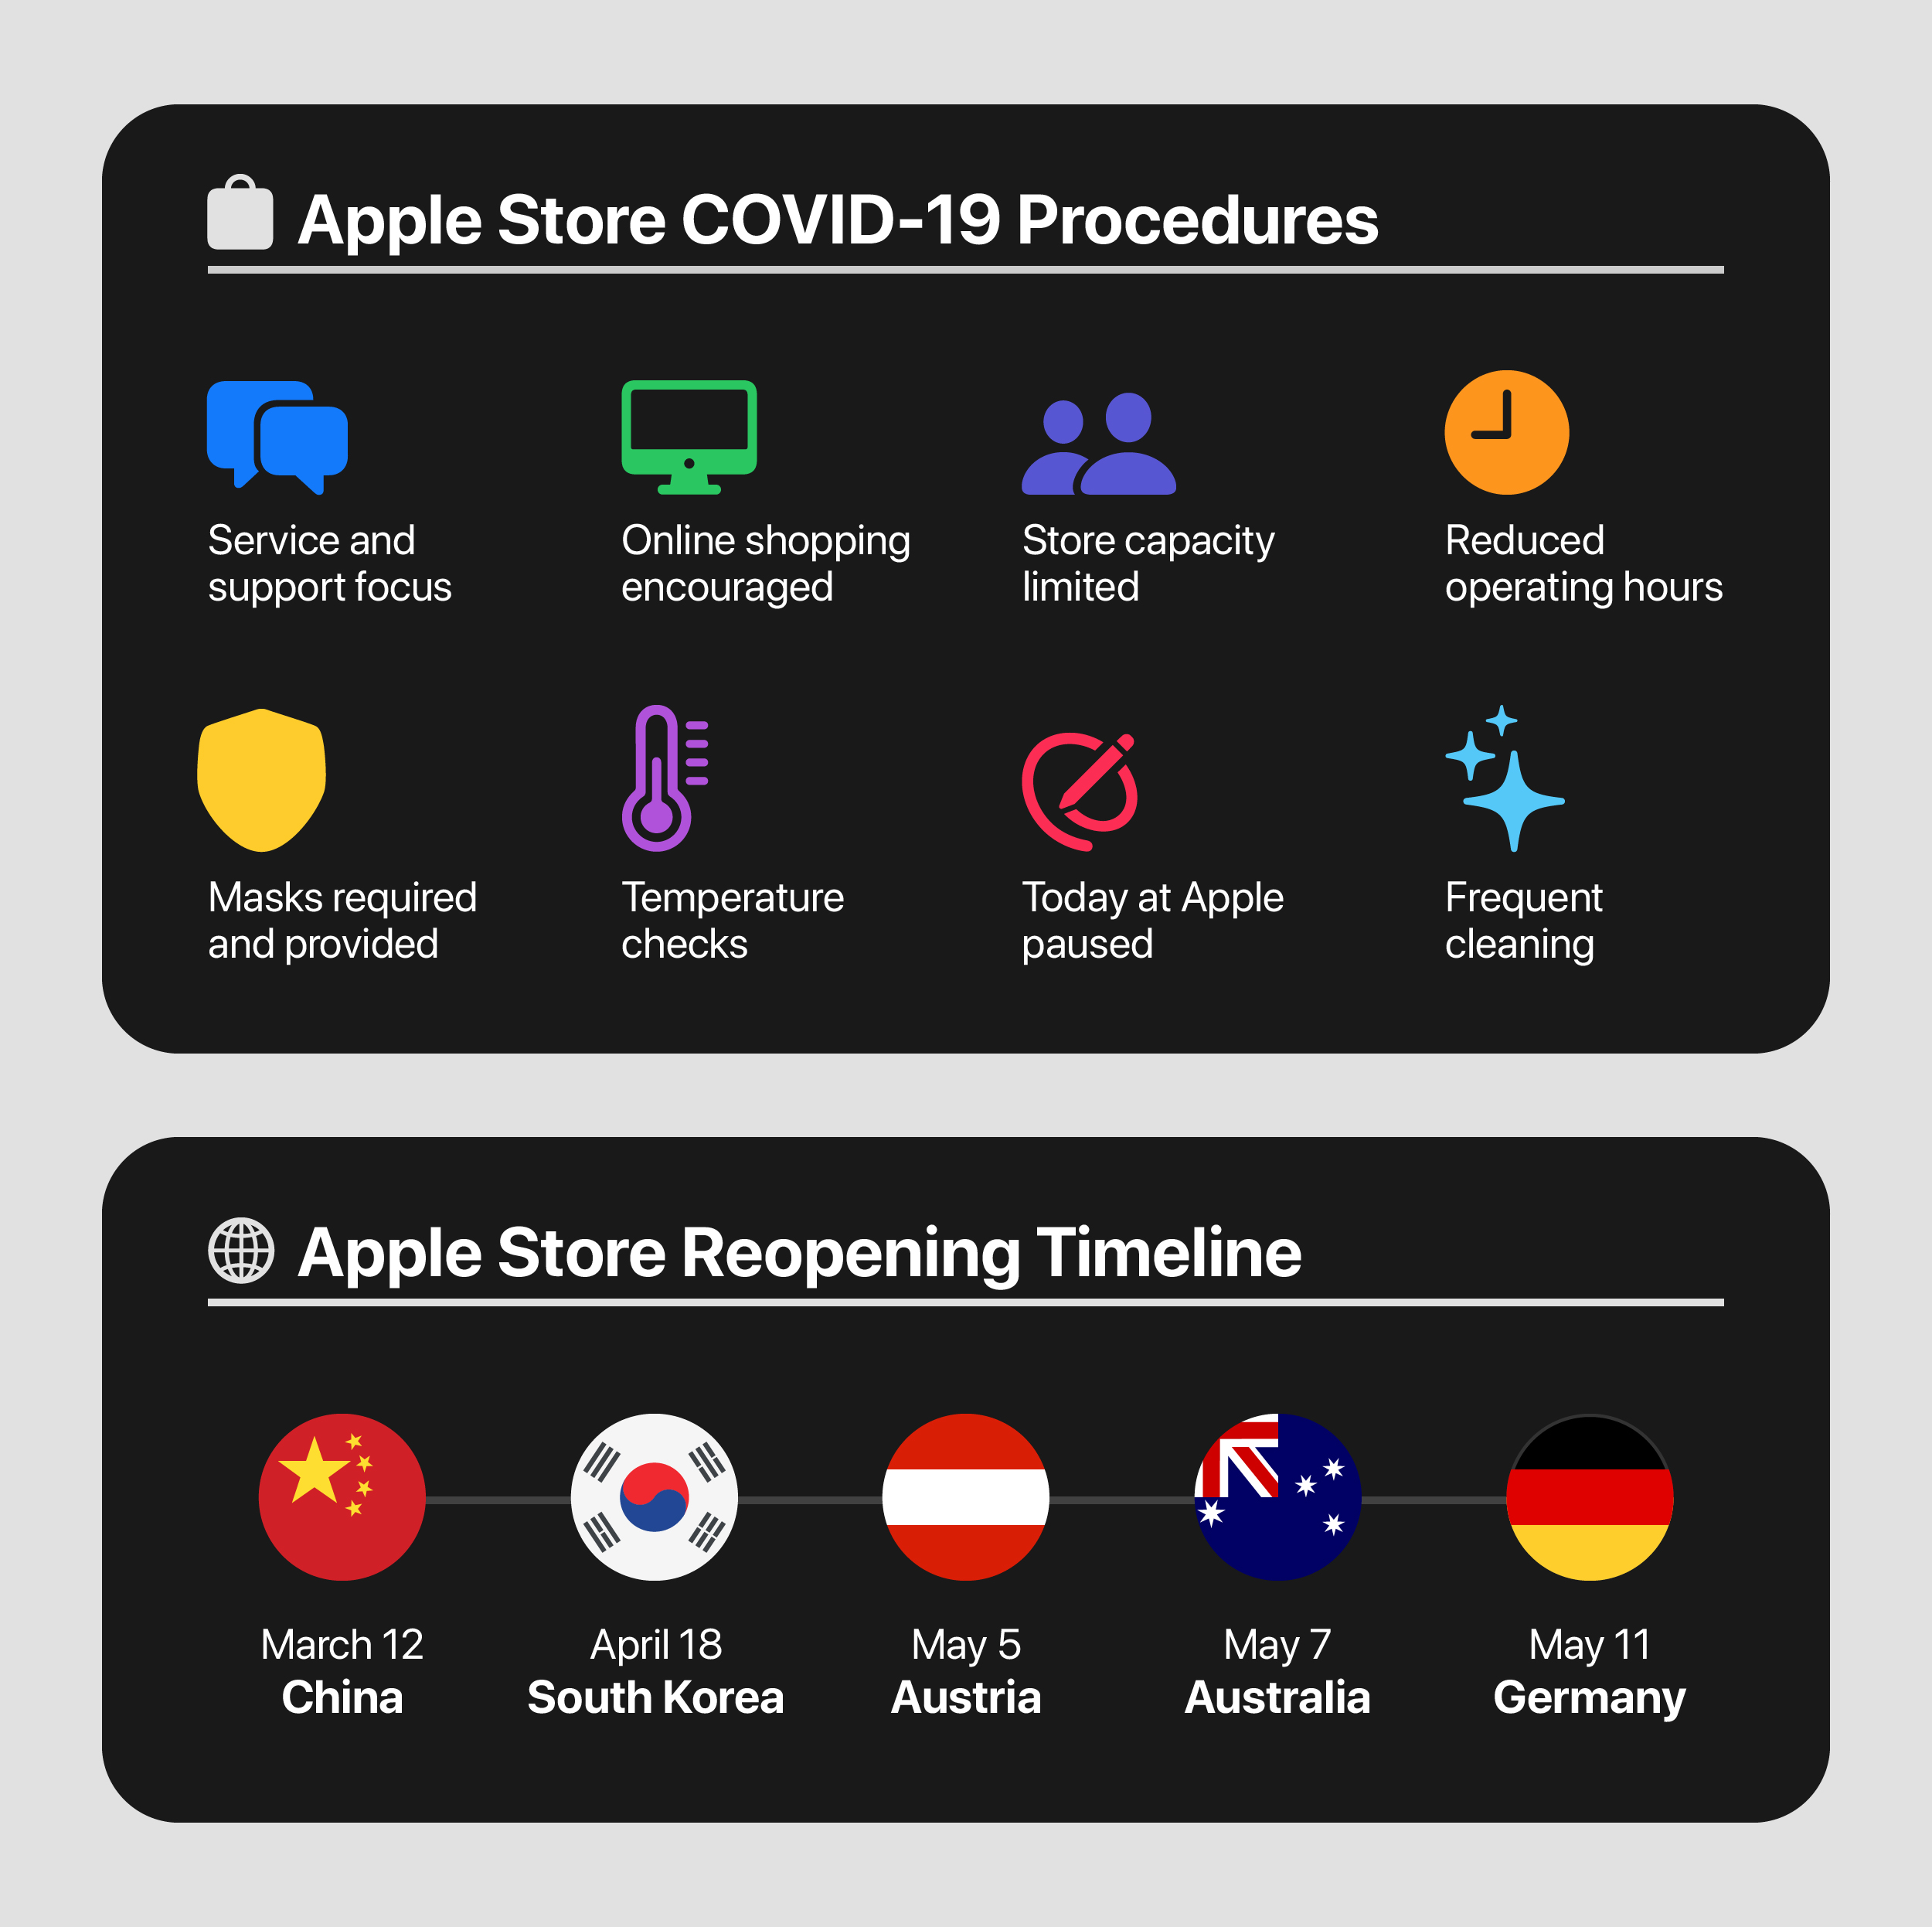 Apple Retail's COVID-19 Response At A Glance